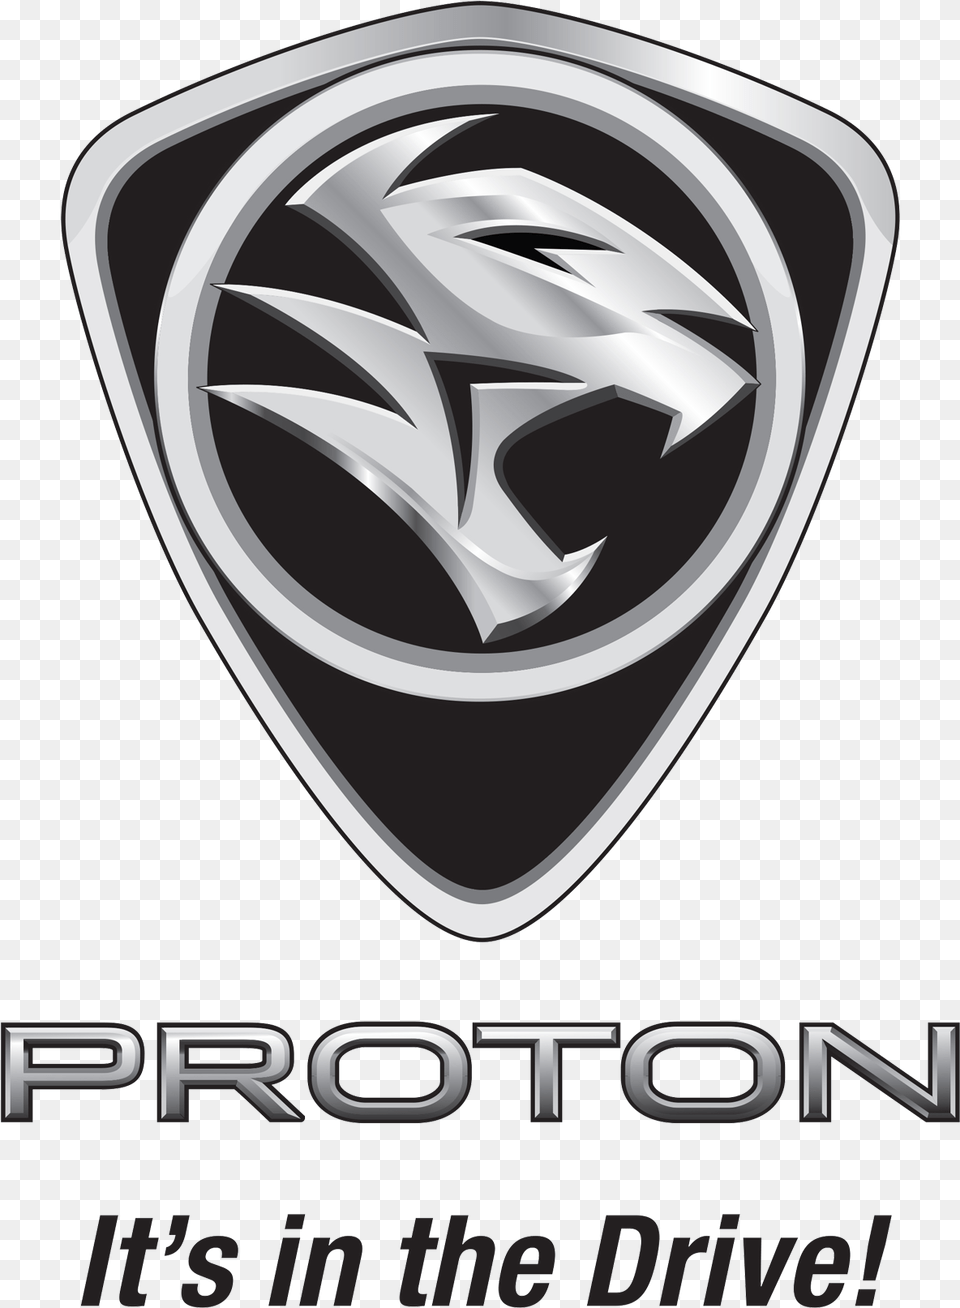 Proton Logo Hd Meaning Information Car Logo With A Tiger Head, Emblem, Symbol, Clothing, Hardhat Free Transparent Png